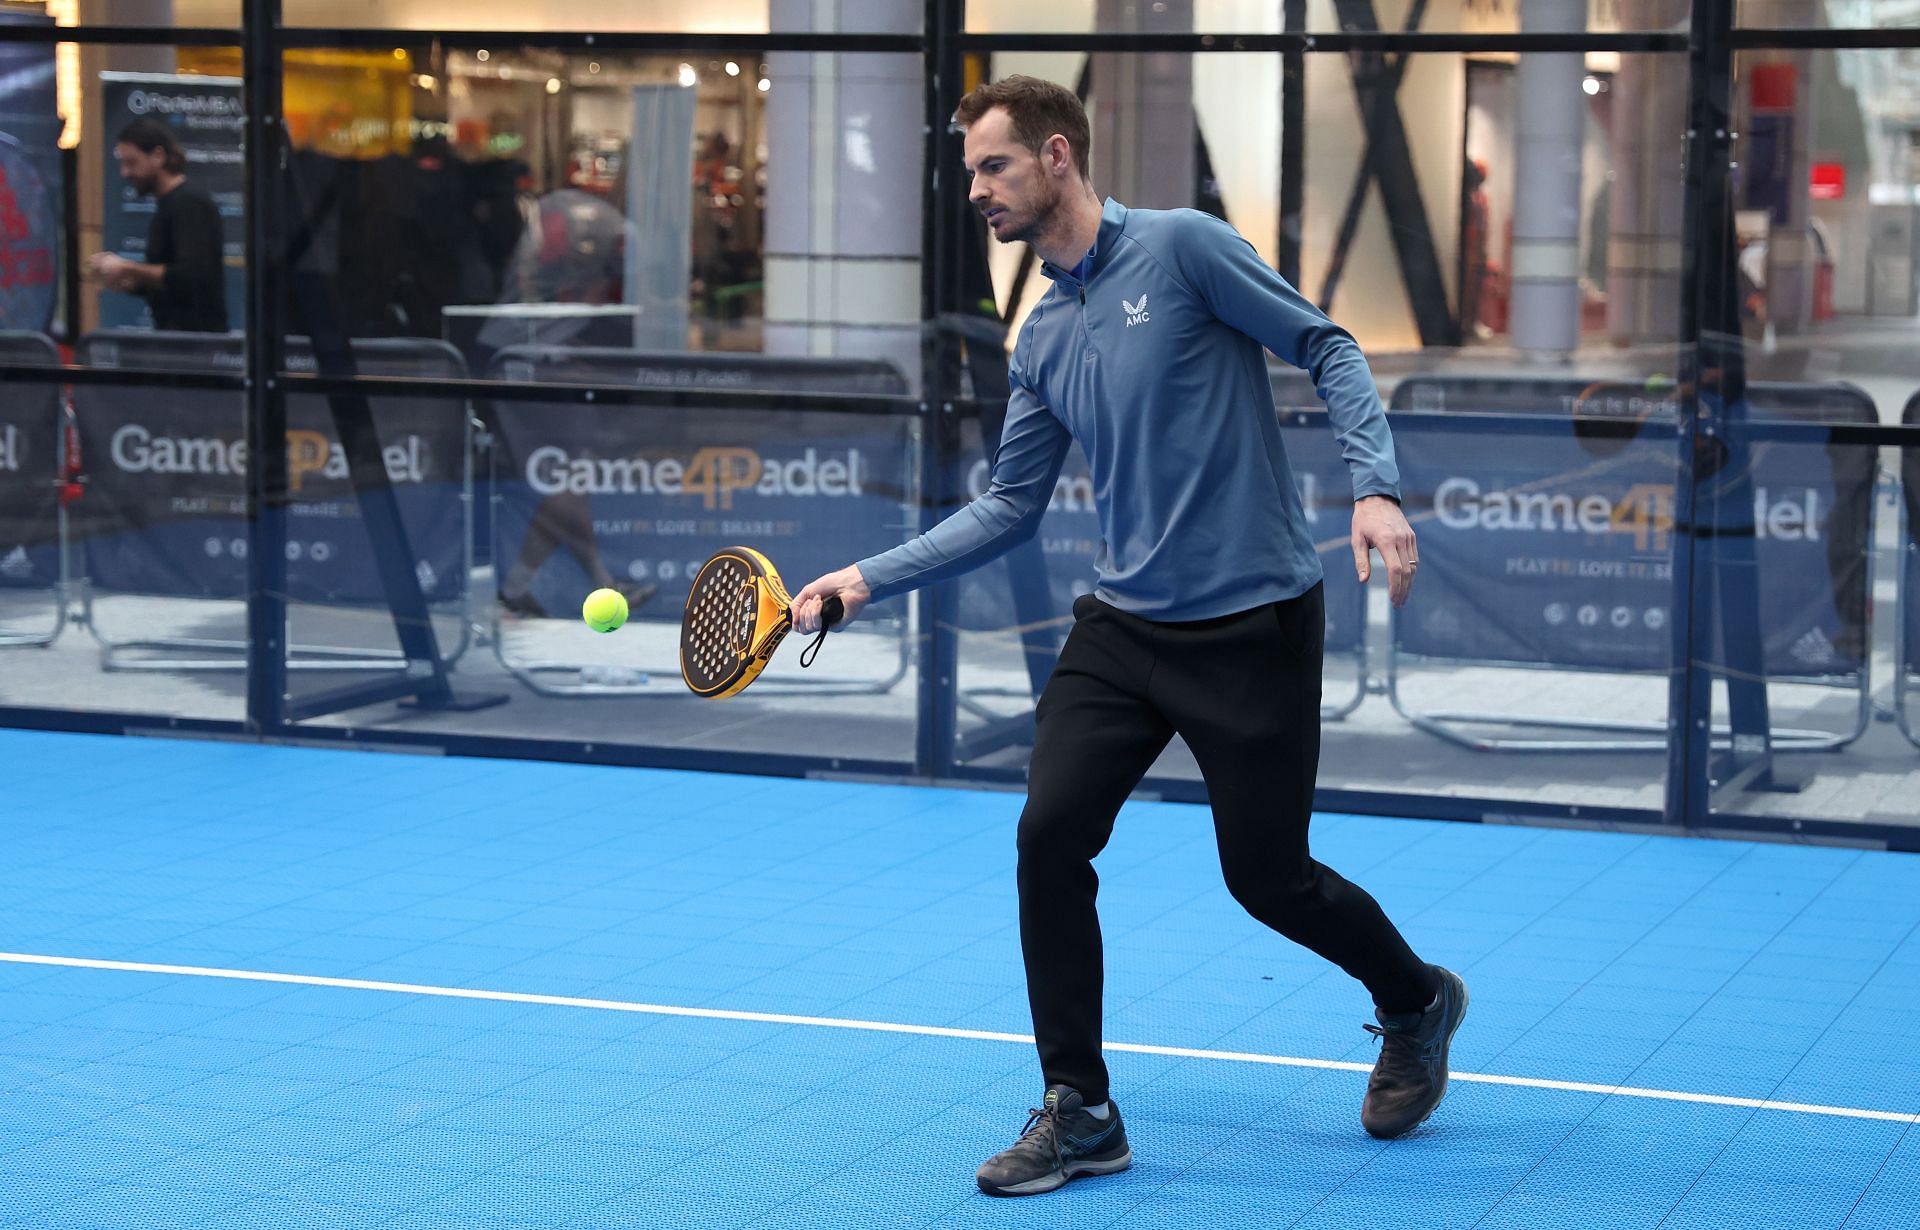 Andy Murray plays Padel at the Game4Padel pop-up event